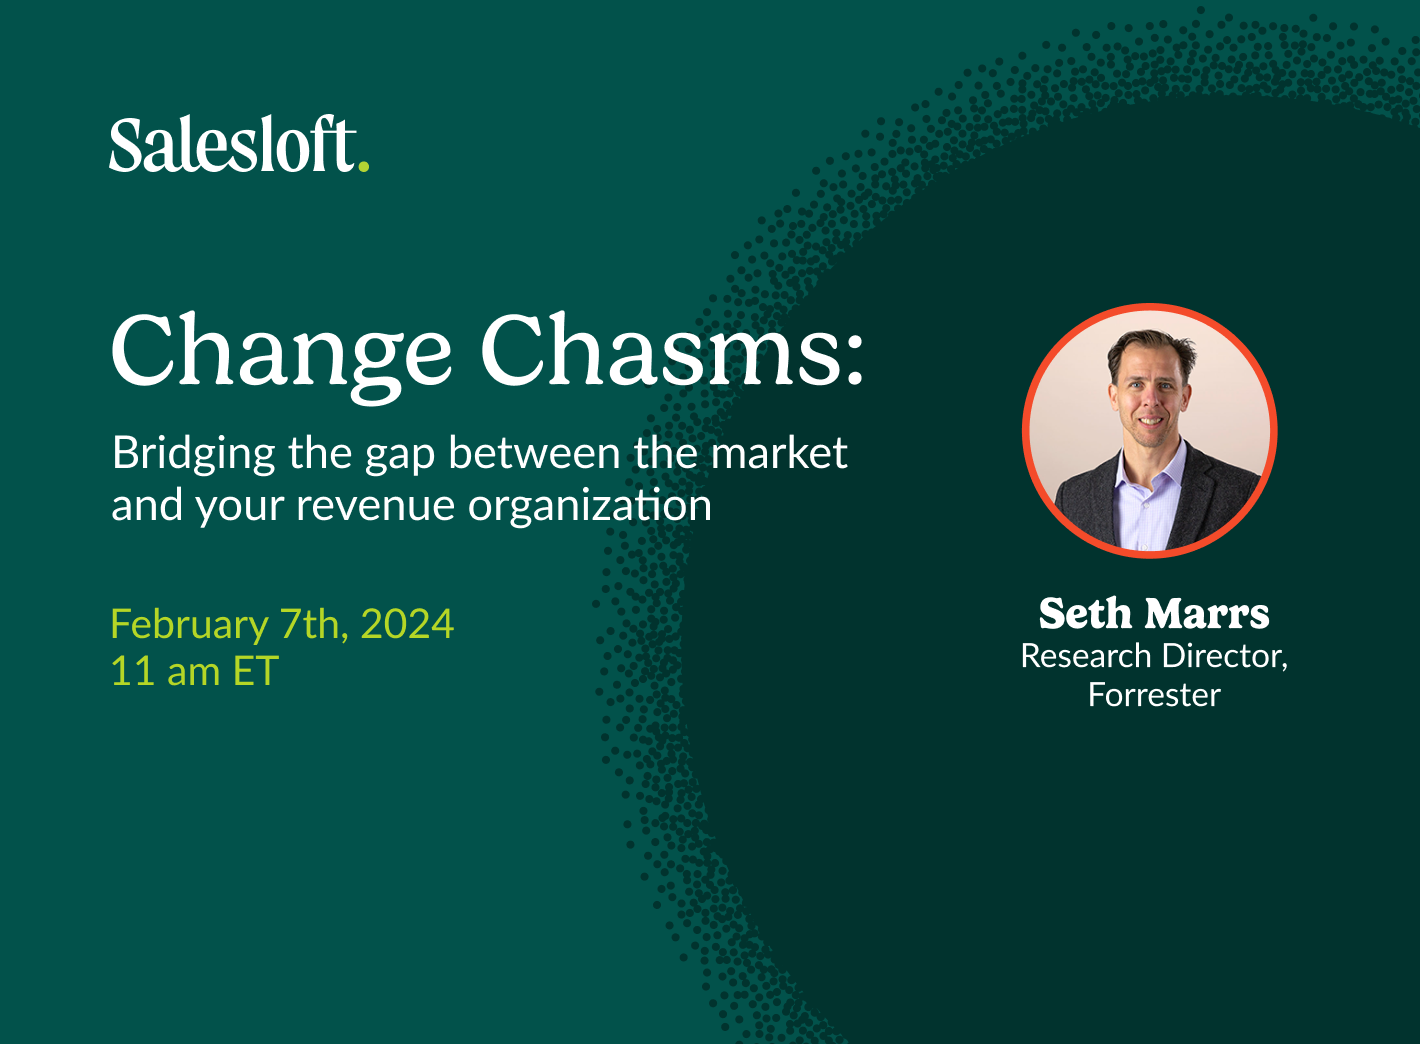 Change Chasms: Bridging the Gap Between the Market and Your Revenue Organization